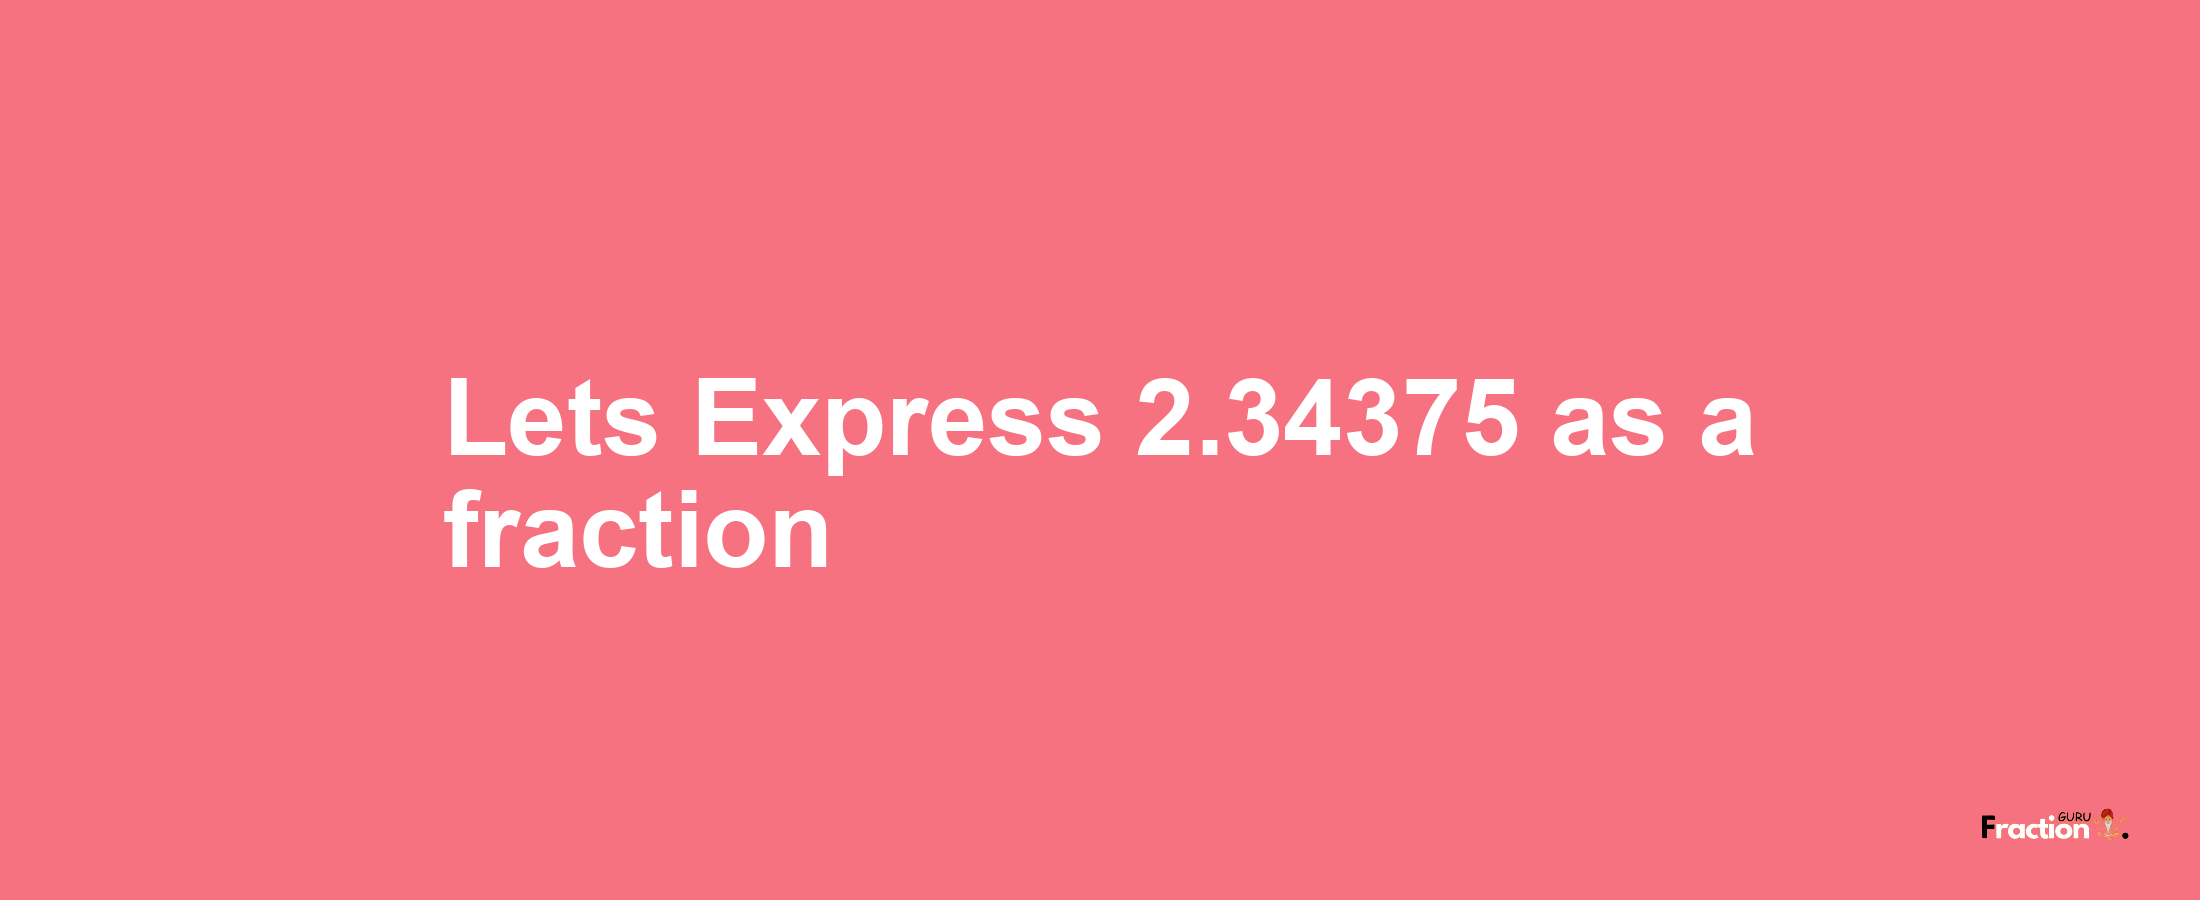 Lets Express 2.34375 as afraction